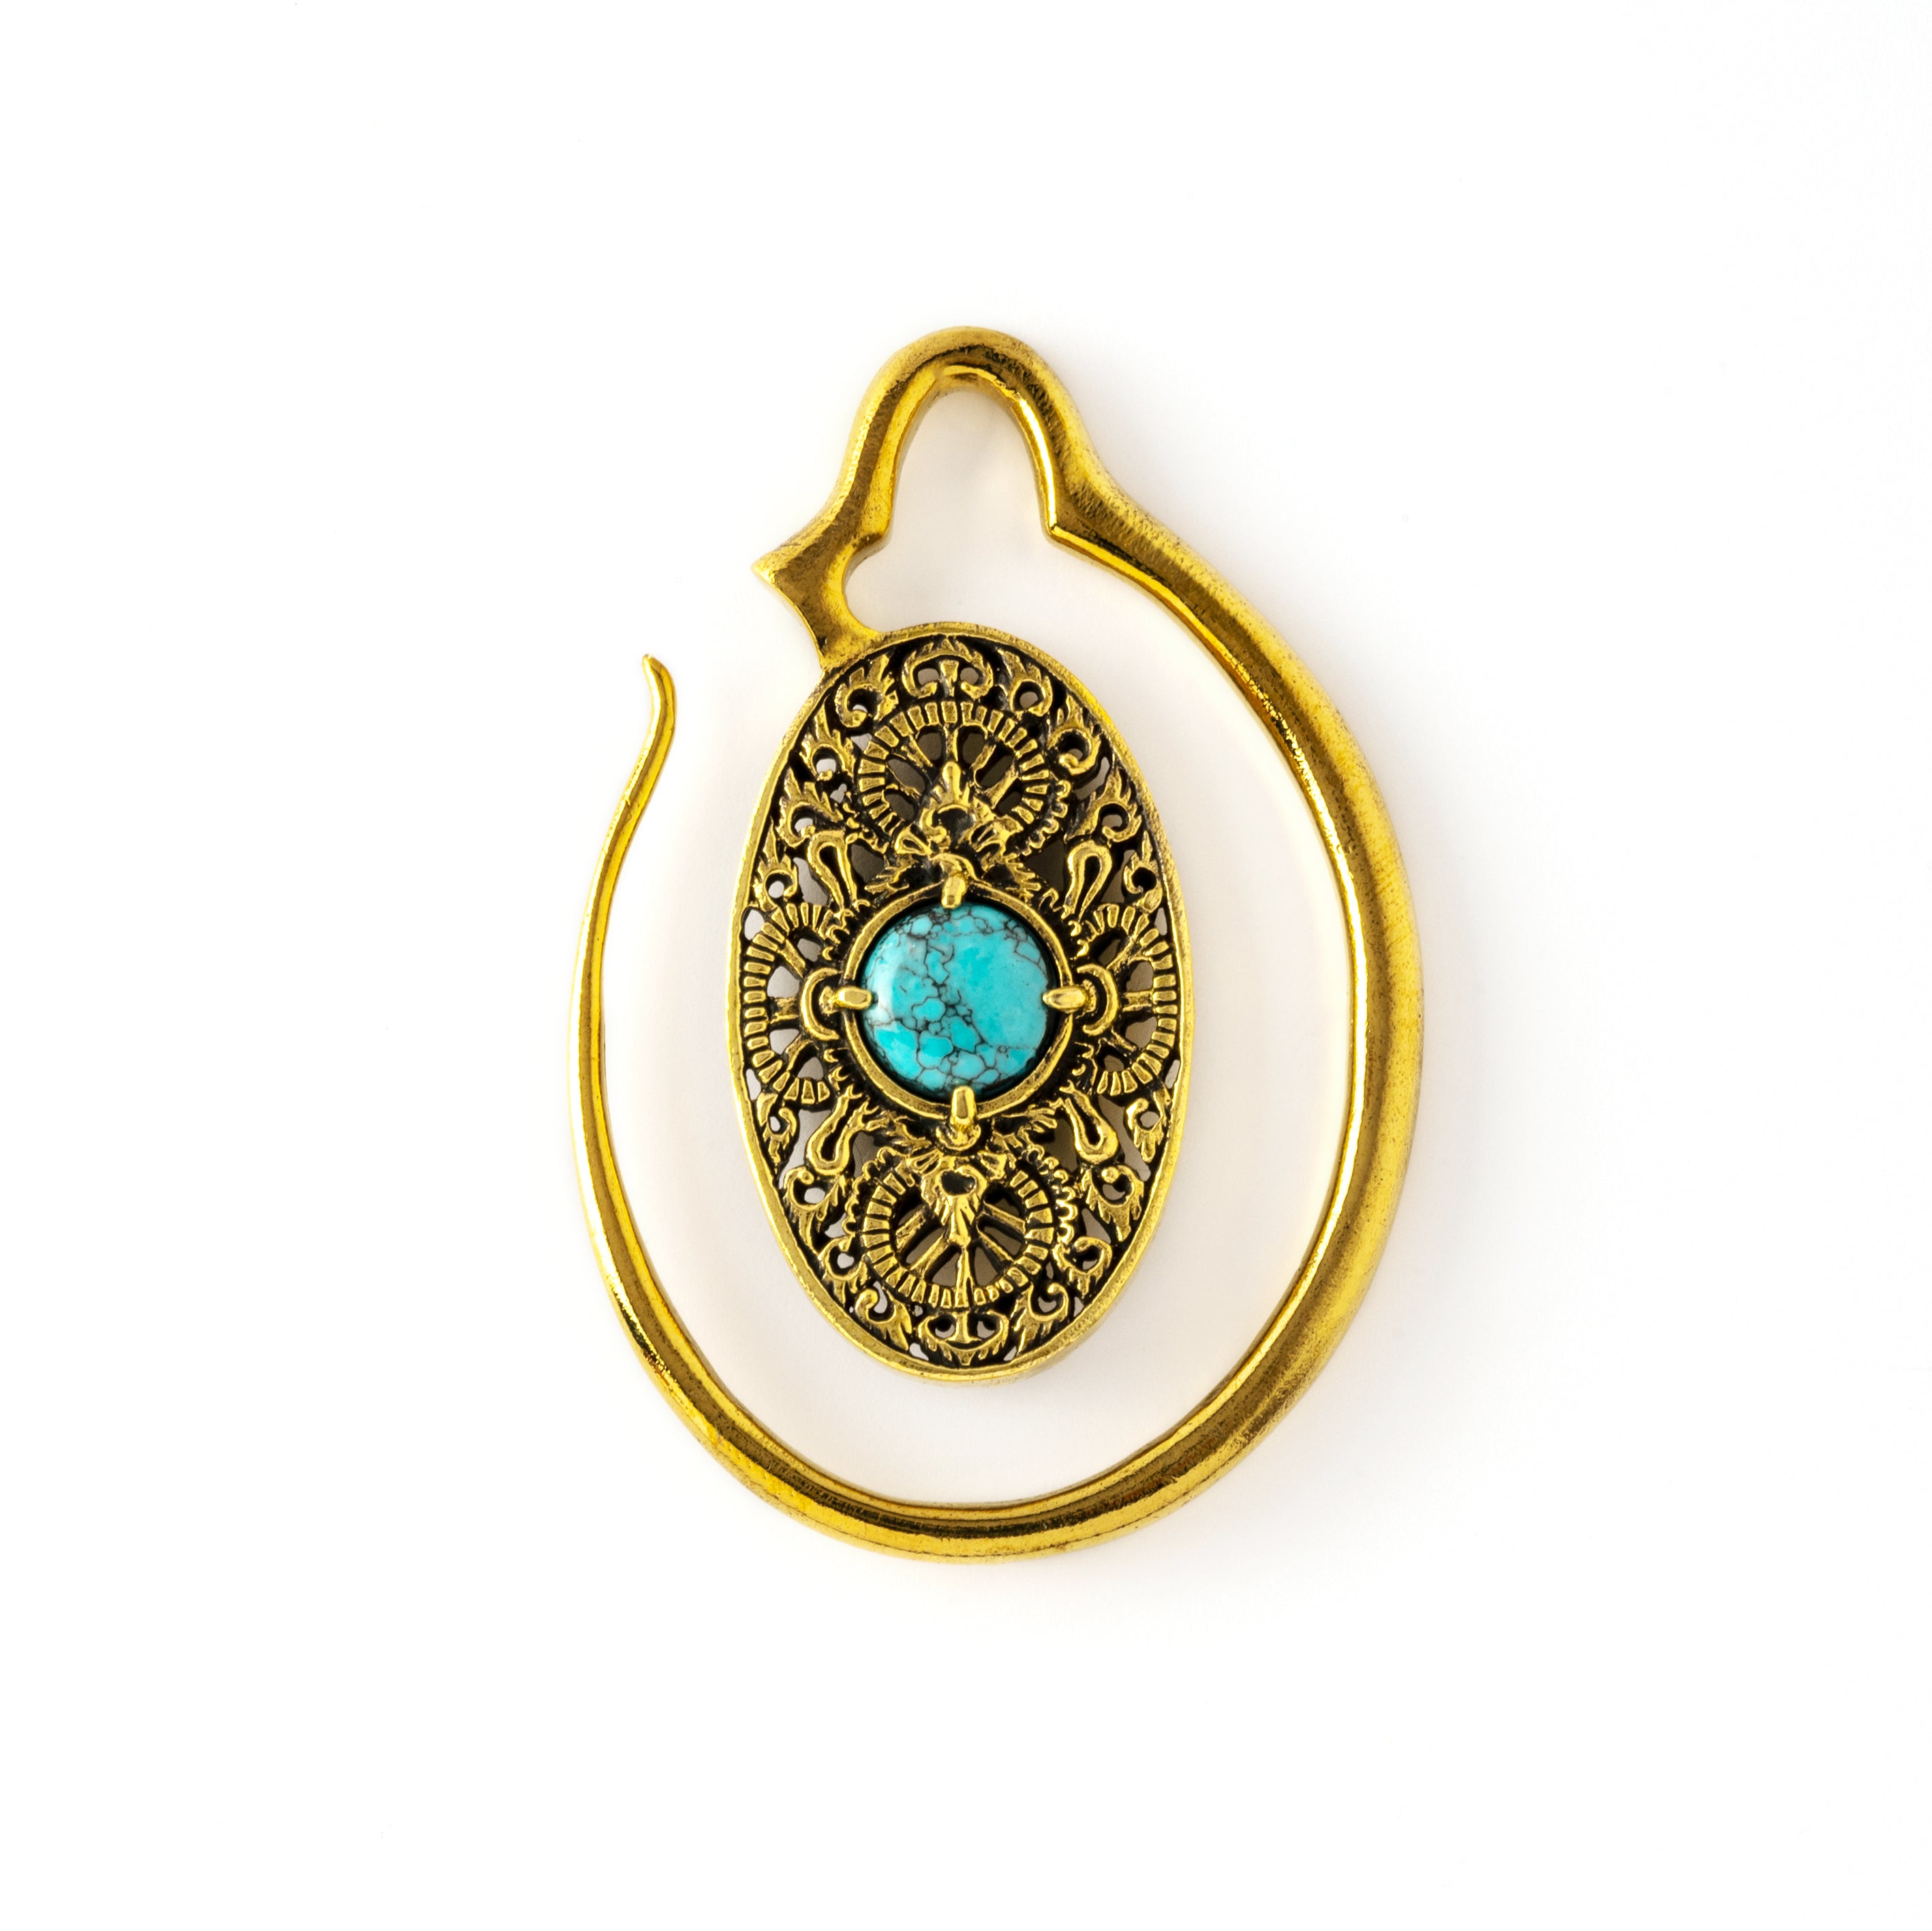 single golden large ear weights hangers oval shaped with intricate filigree pattern and turquoise